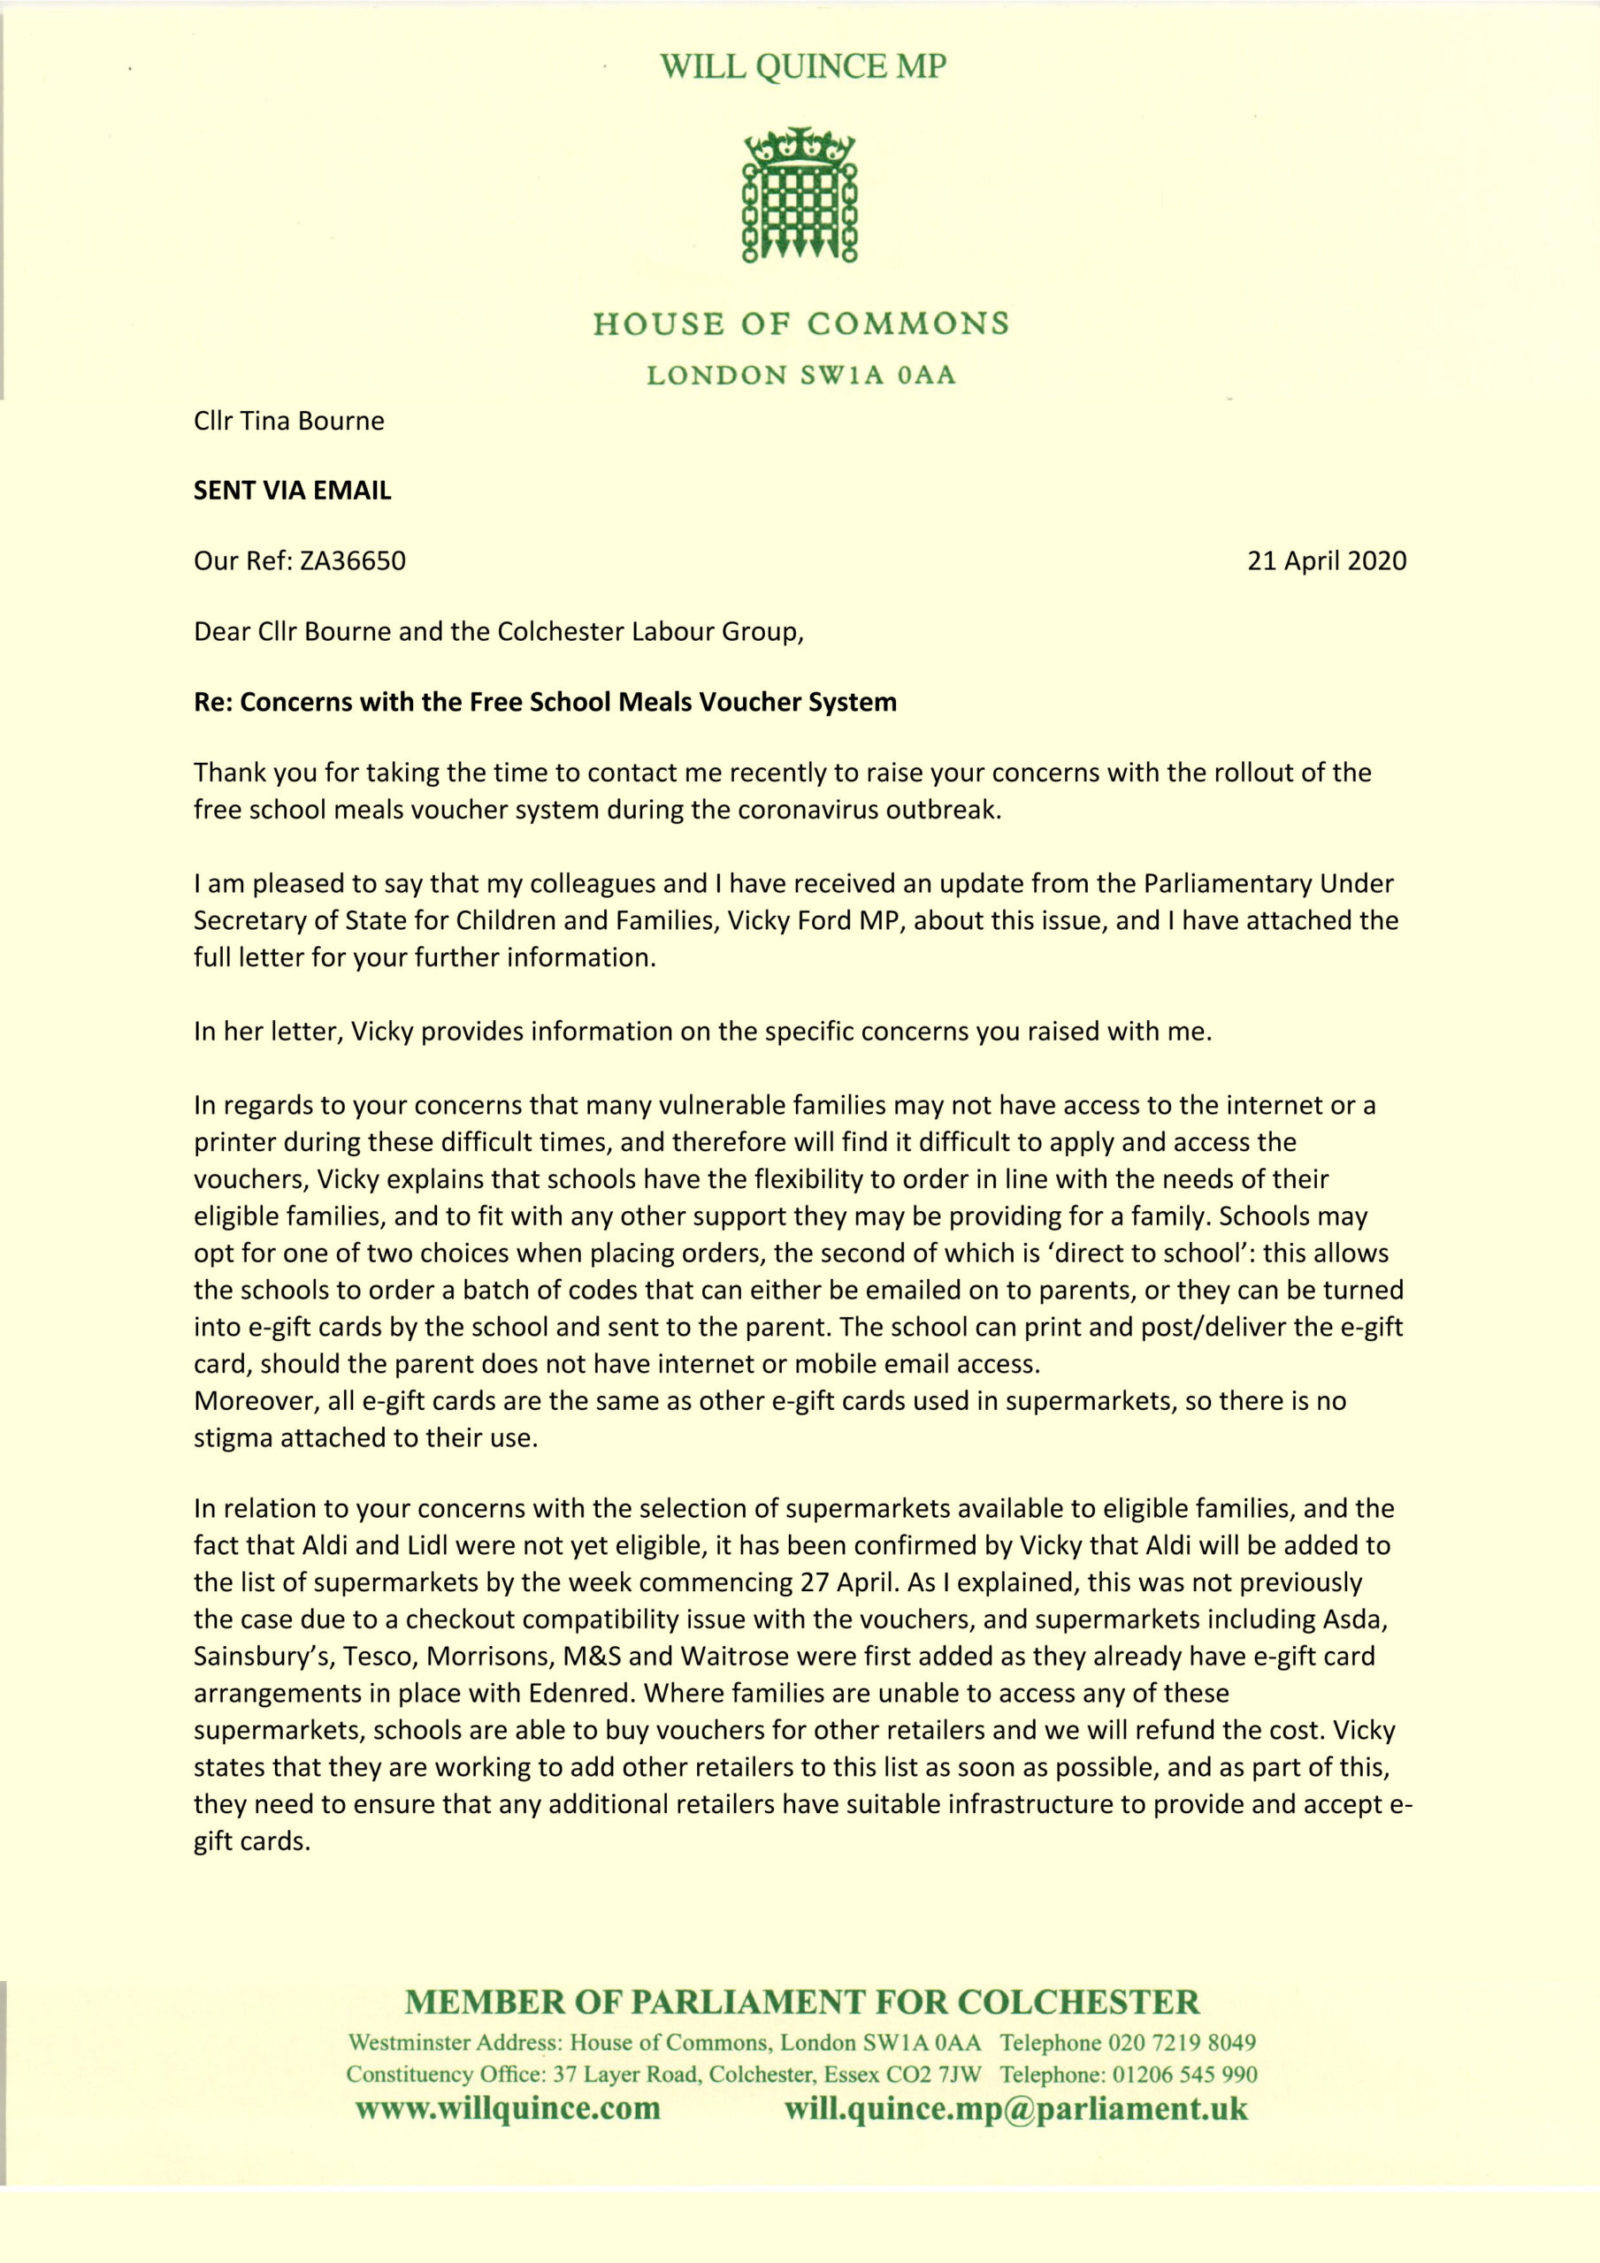 Will Quince MP Further Response